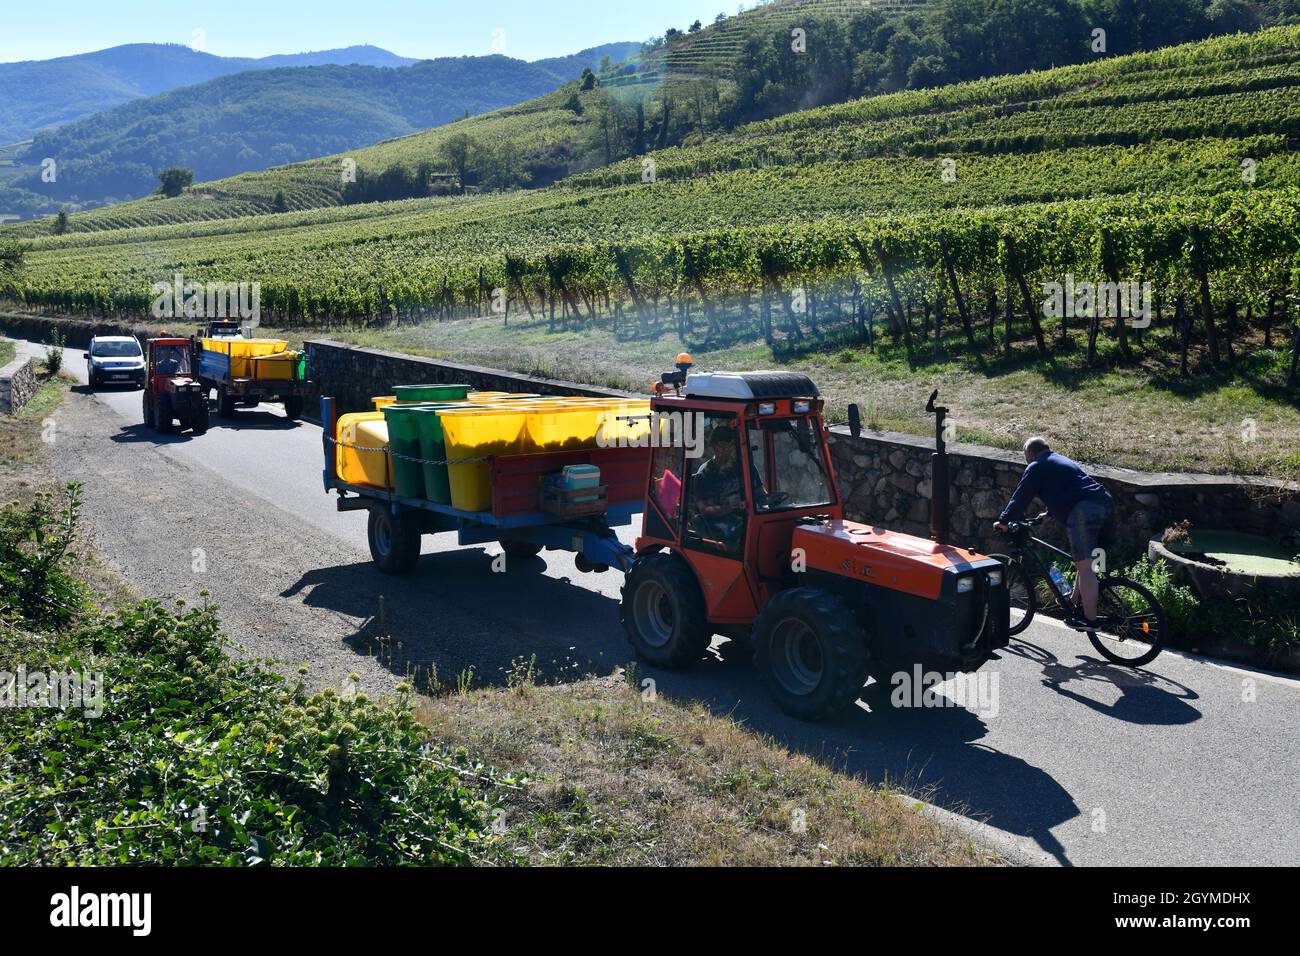 Grape picker harvesting grapes for wine making in the Alsace region of France Stock Photo